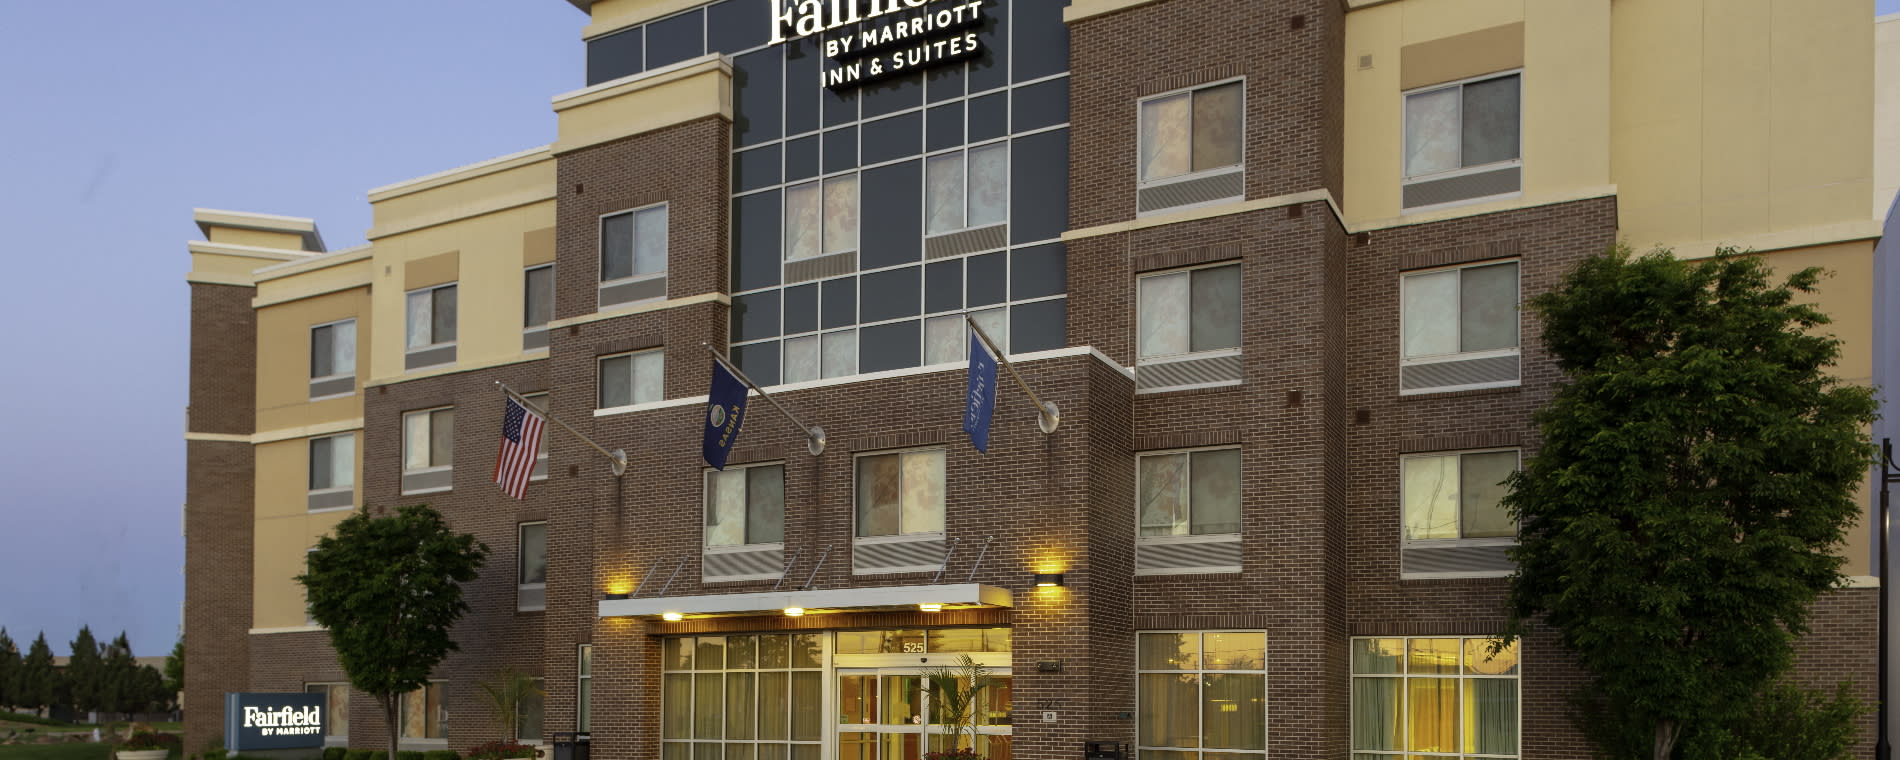 Fairfield Inn and Suites by Marriott Downtown